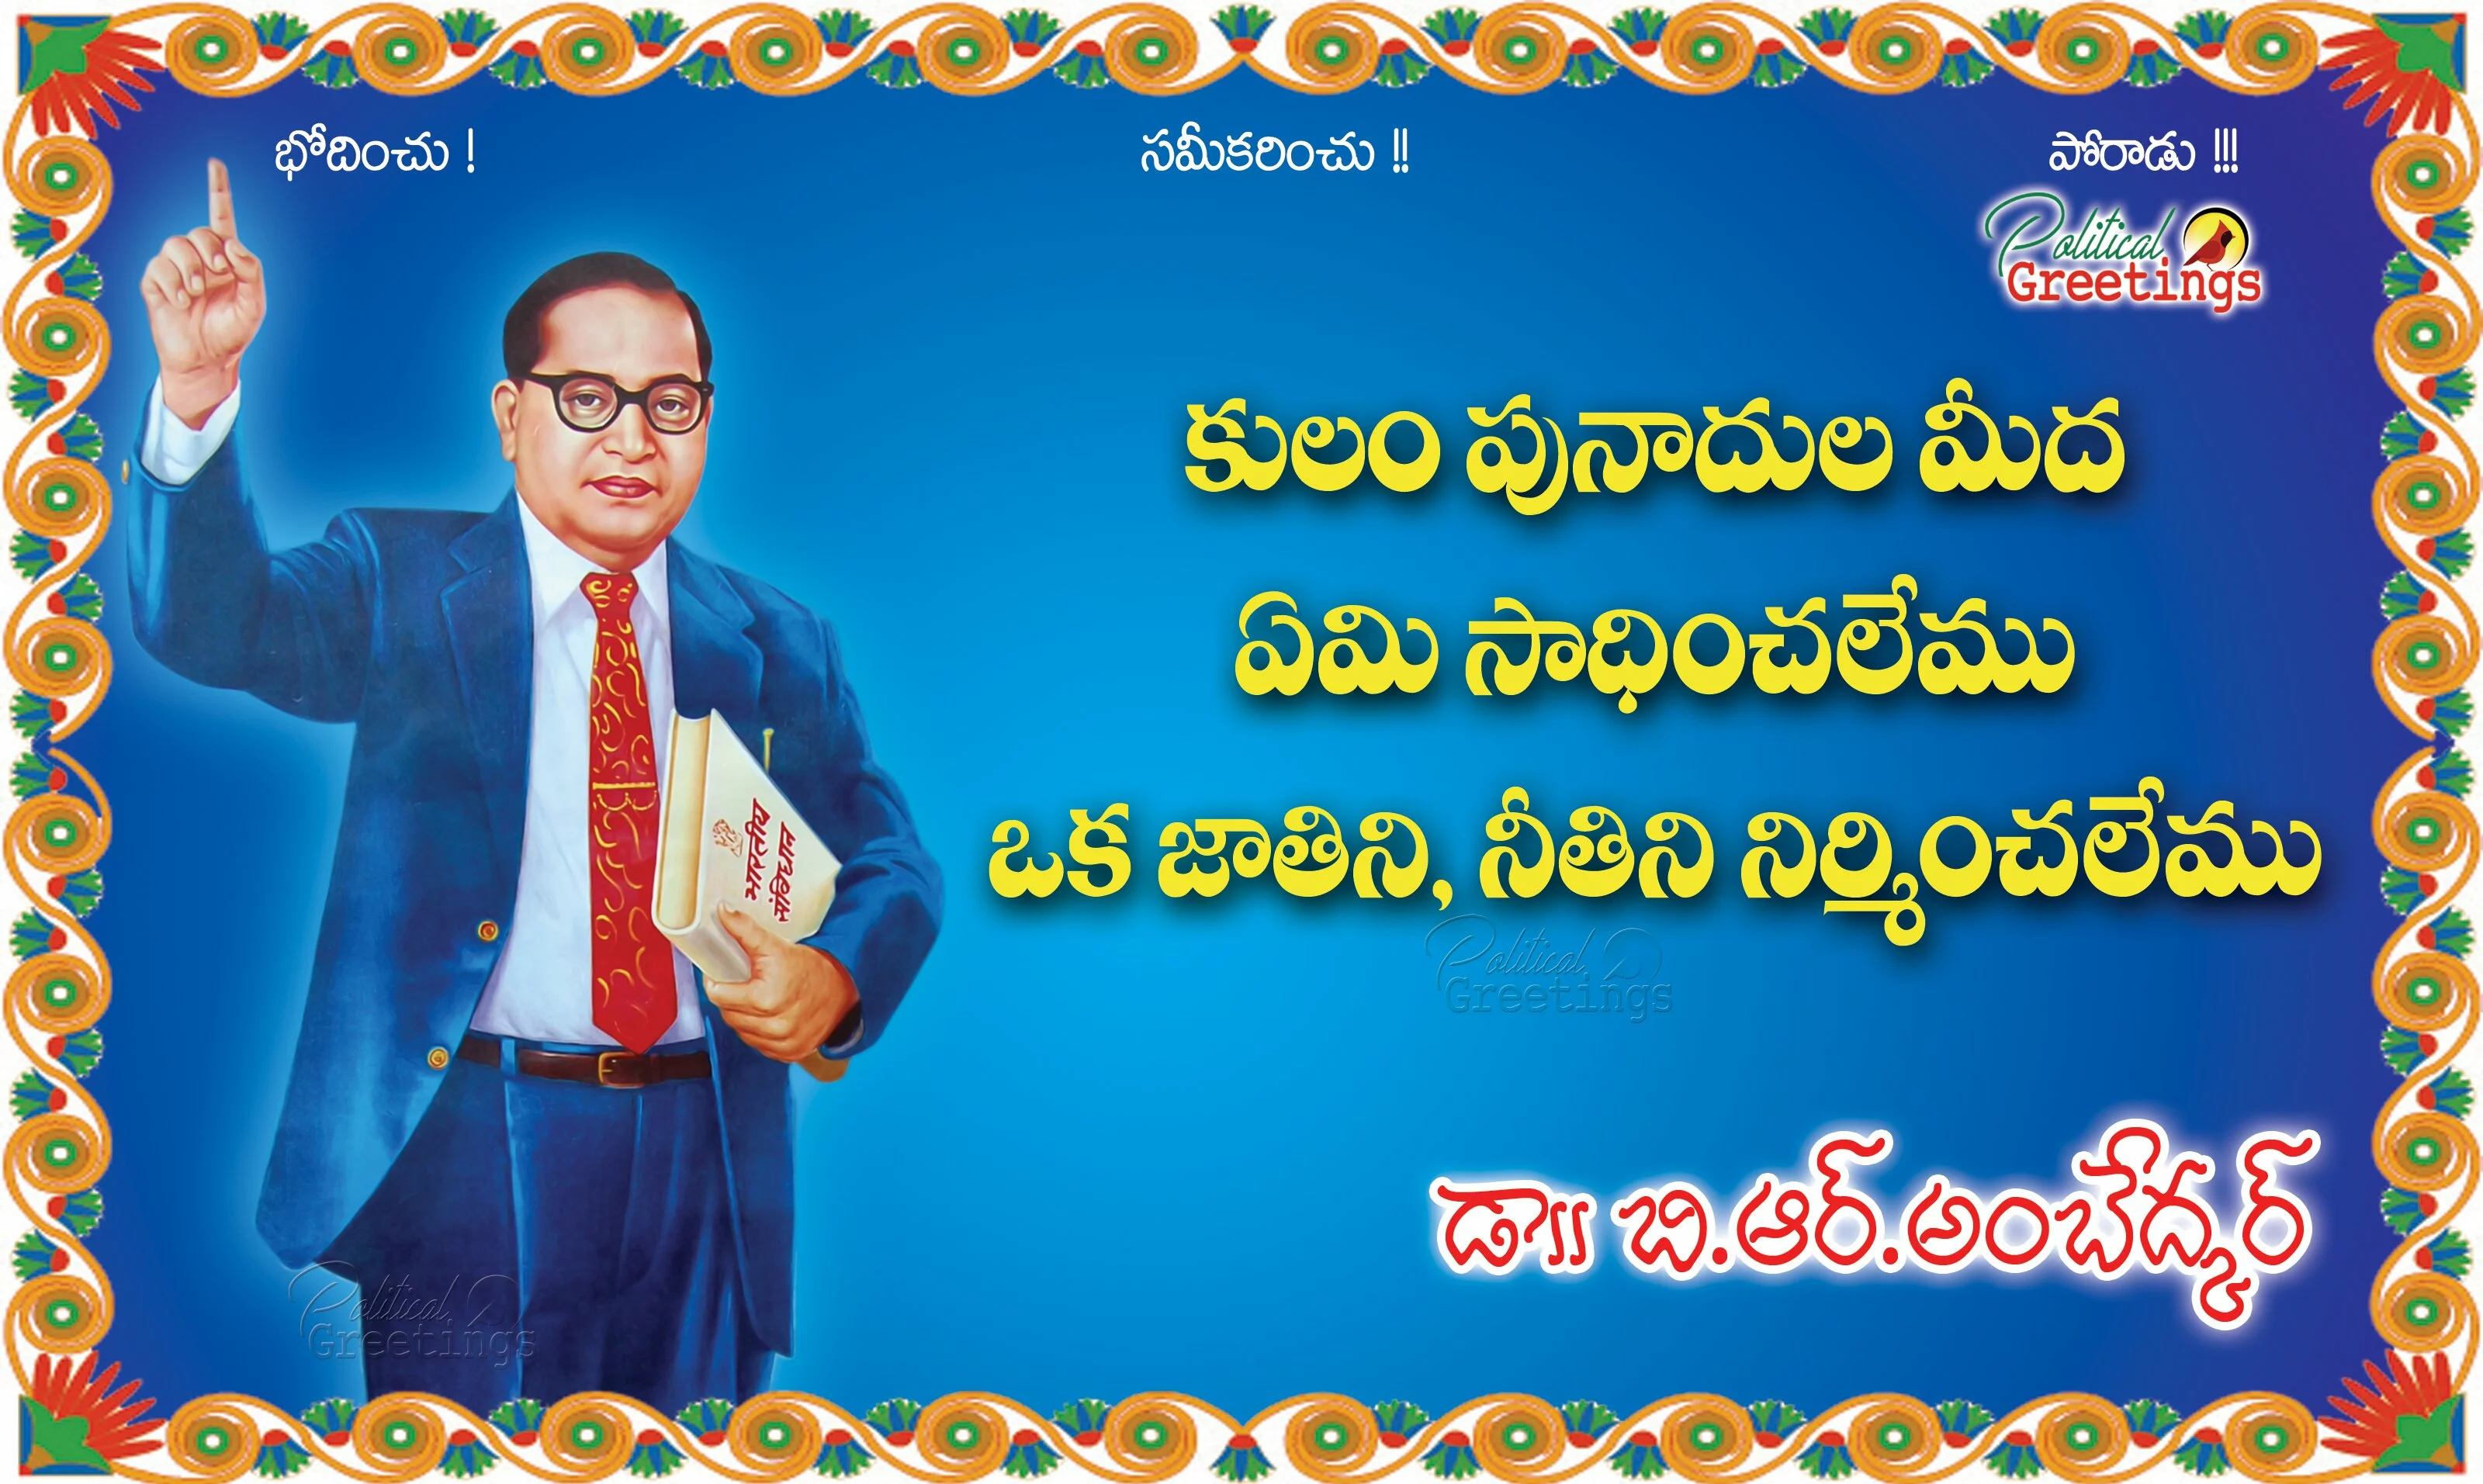 Ambedkar jayanti wishes messages SMS quotes images in Telugu1